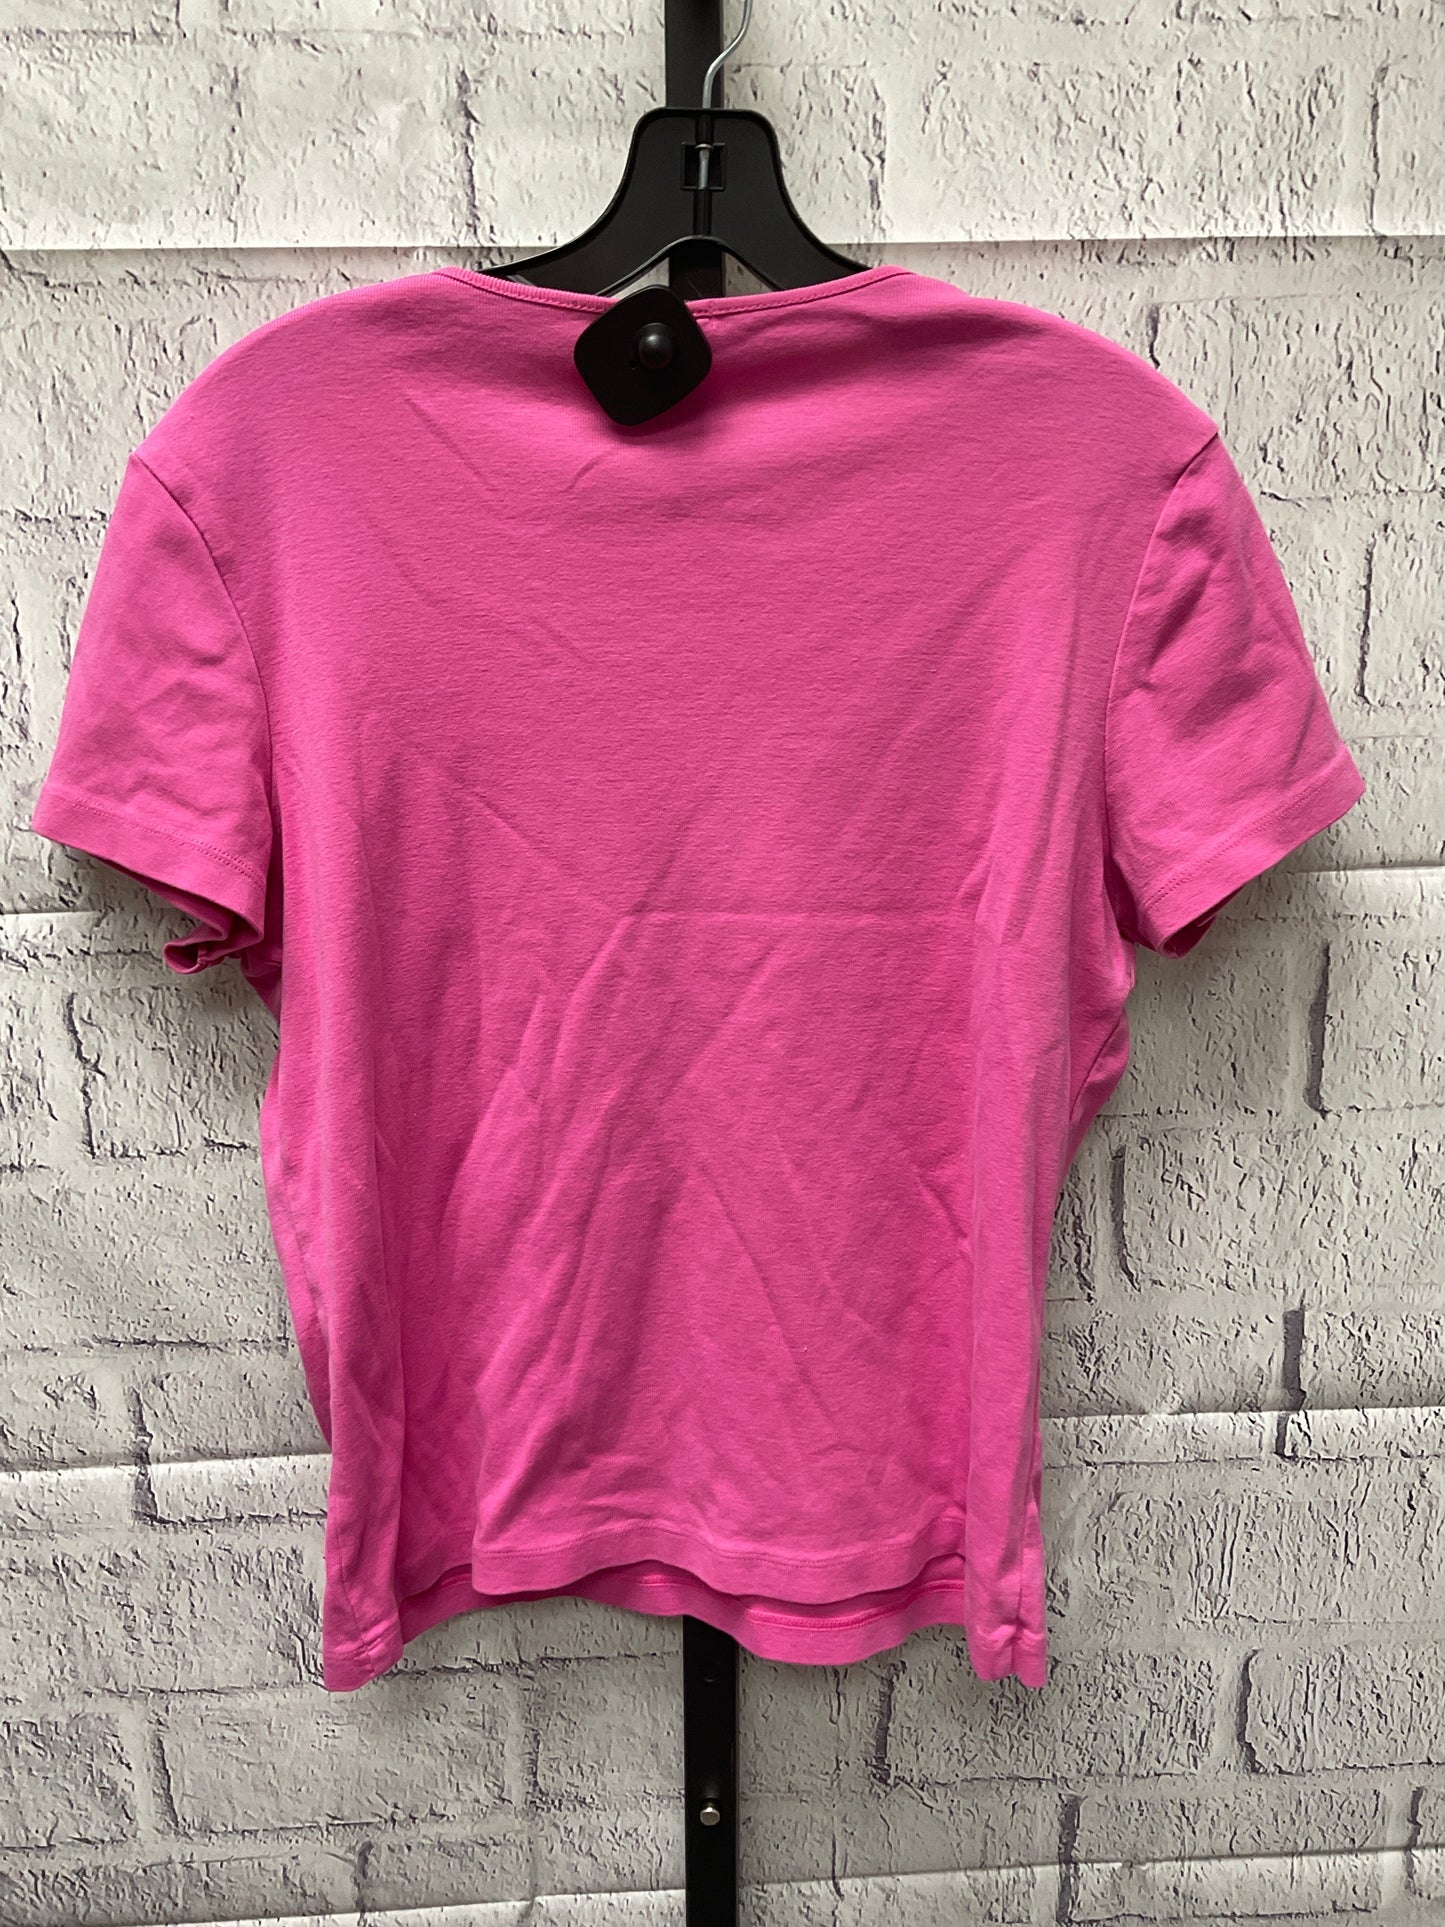 Top Short Sleeve By Old Navy  Size: M